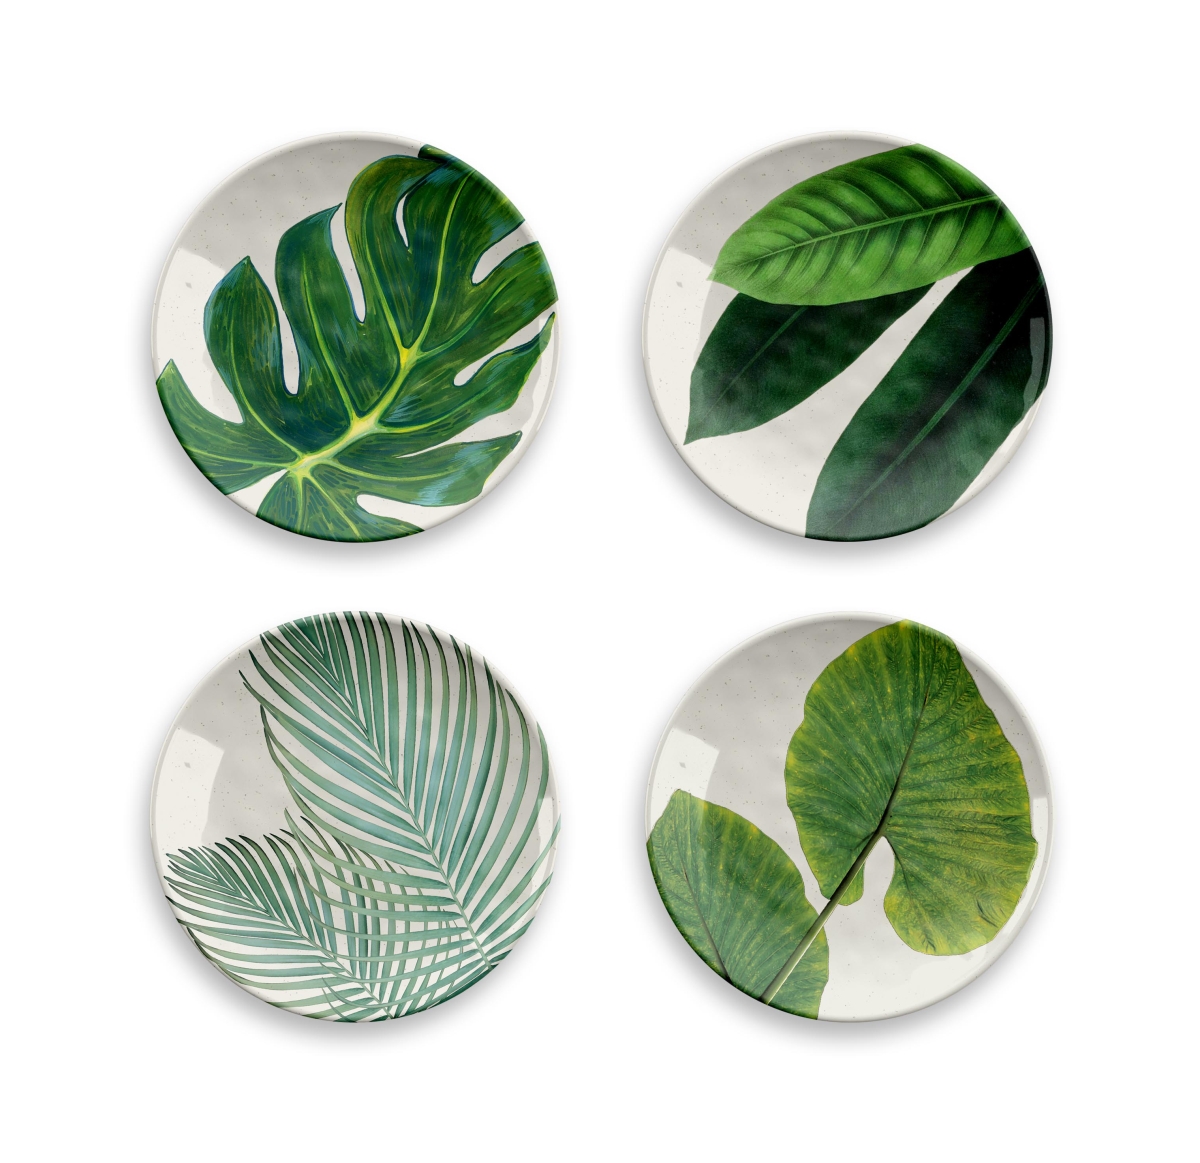 Pvc1085vcsgw Amazon Floral Bamboo Fiber Salad Plates, Set Of 4 - Assorted Patterns